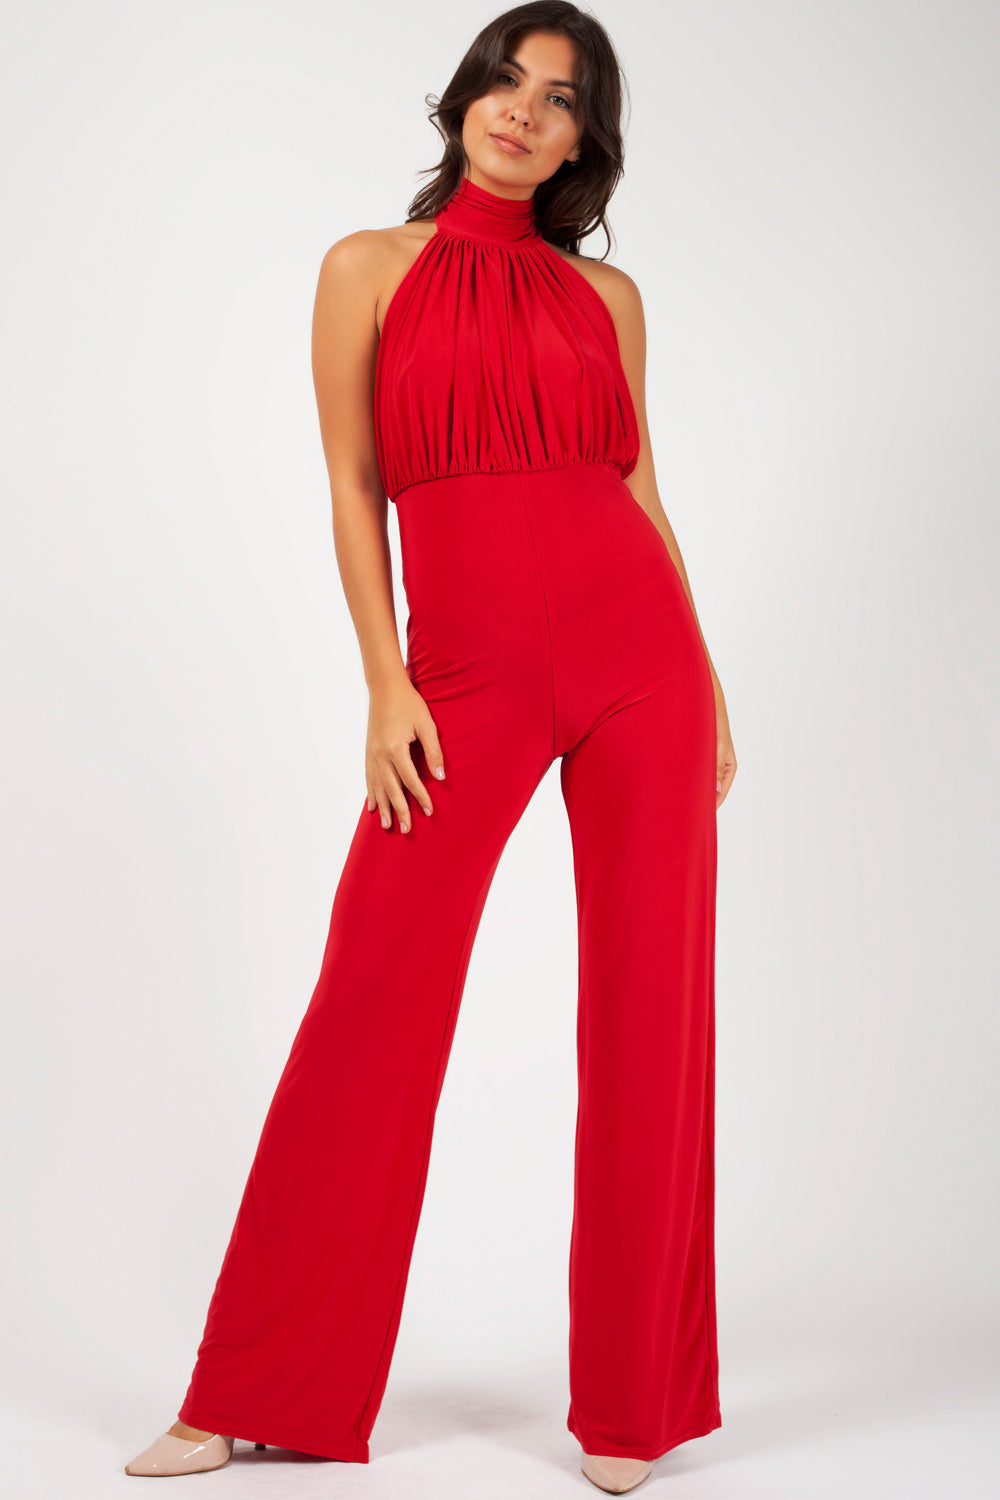 special occasion jumpsuits uk